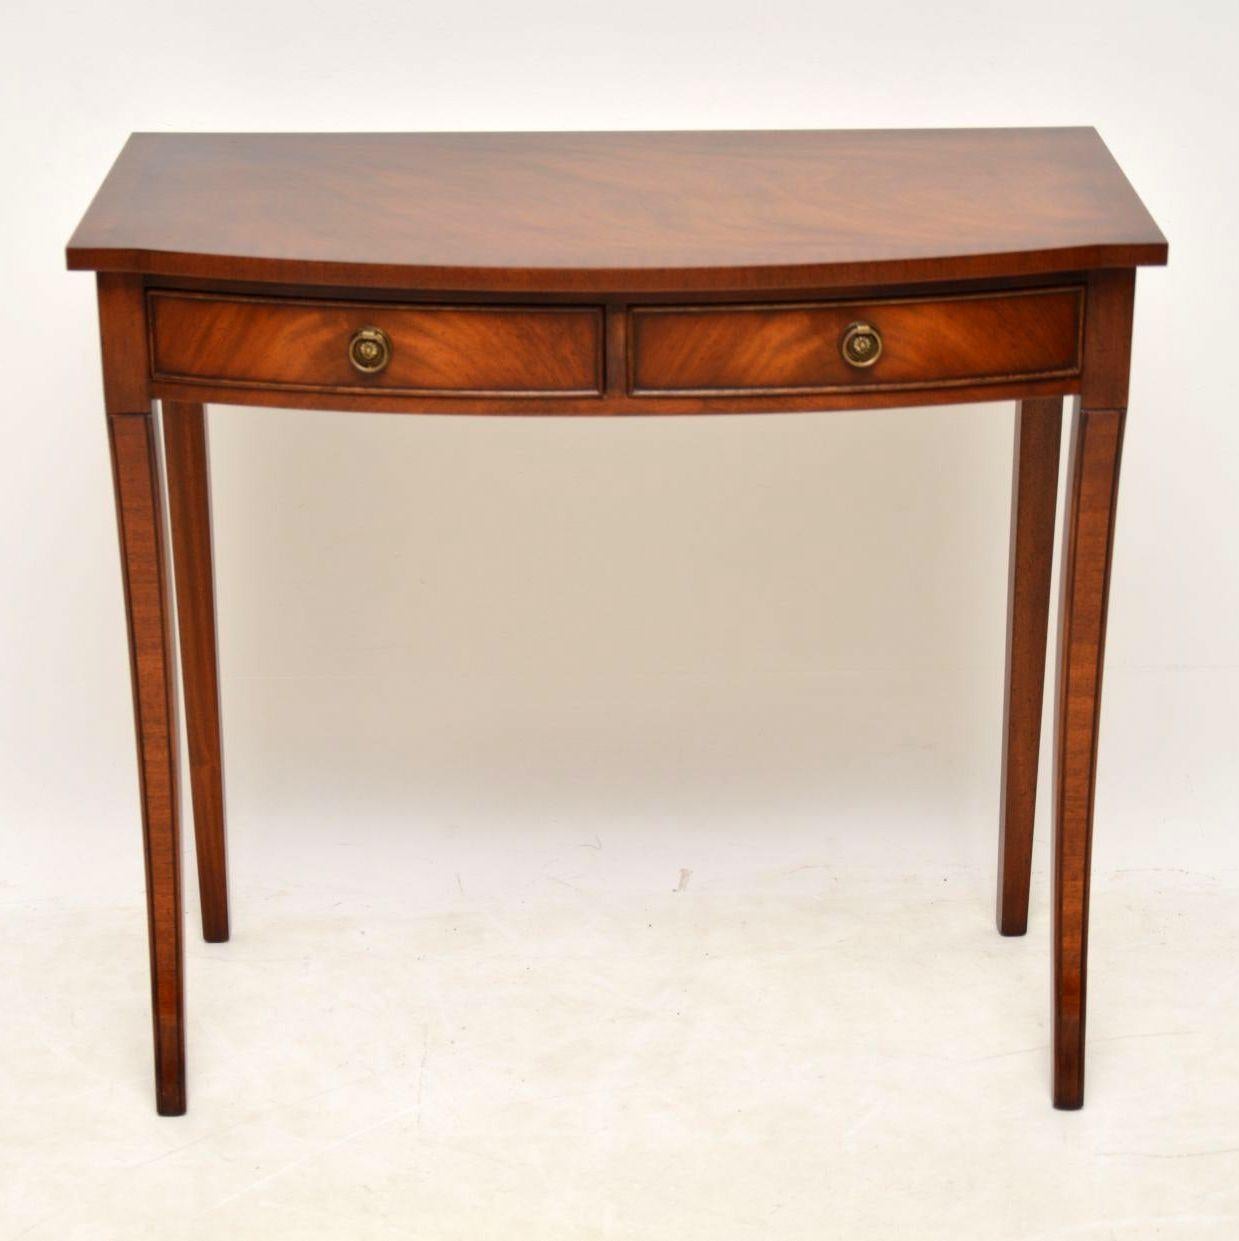 Antique Regency style mahogany side table in good condition and dating from the 1950s period. It has a cross banded flame mahogany top, two drawers with brass handles and sits on sabre legs. This table could be used as a side table or even a writing